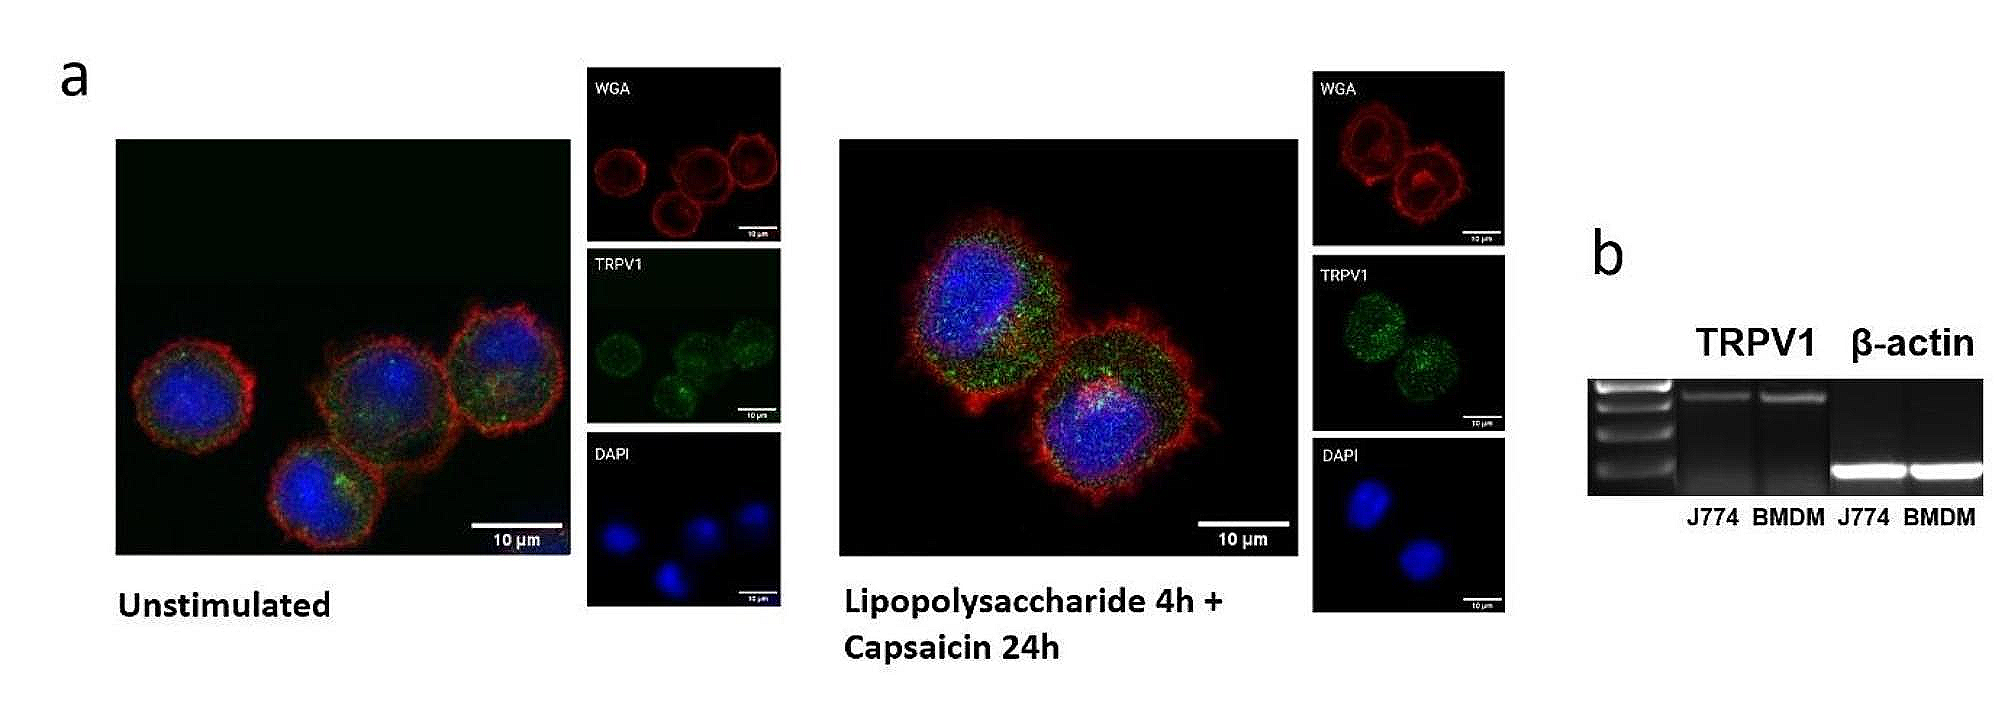 Lipopolysaccharide pretreatment increases the sensitivity of the TRPV1 channel and promotes an anti-inflammatory phenotype of capsaicin-activated macrophages